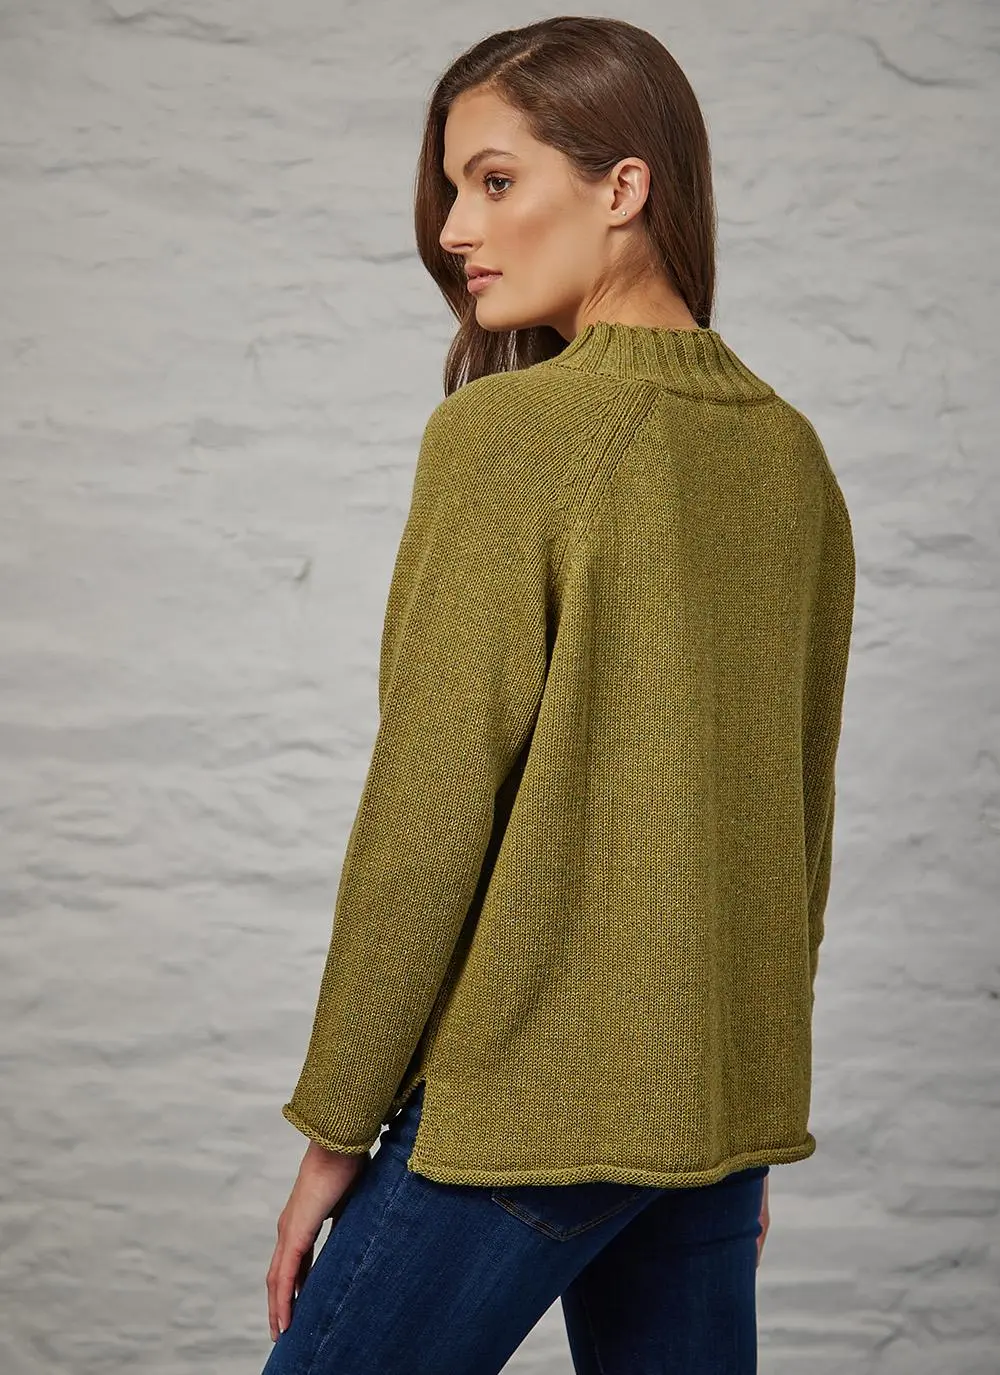 Donegal Tweed Turtle Neck Sweater with Rolled Hems